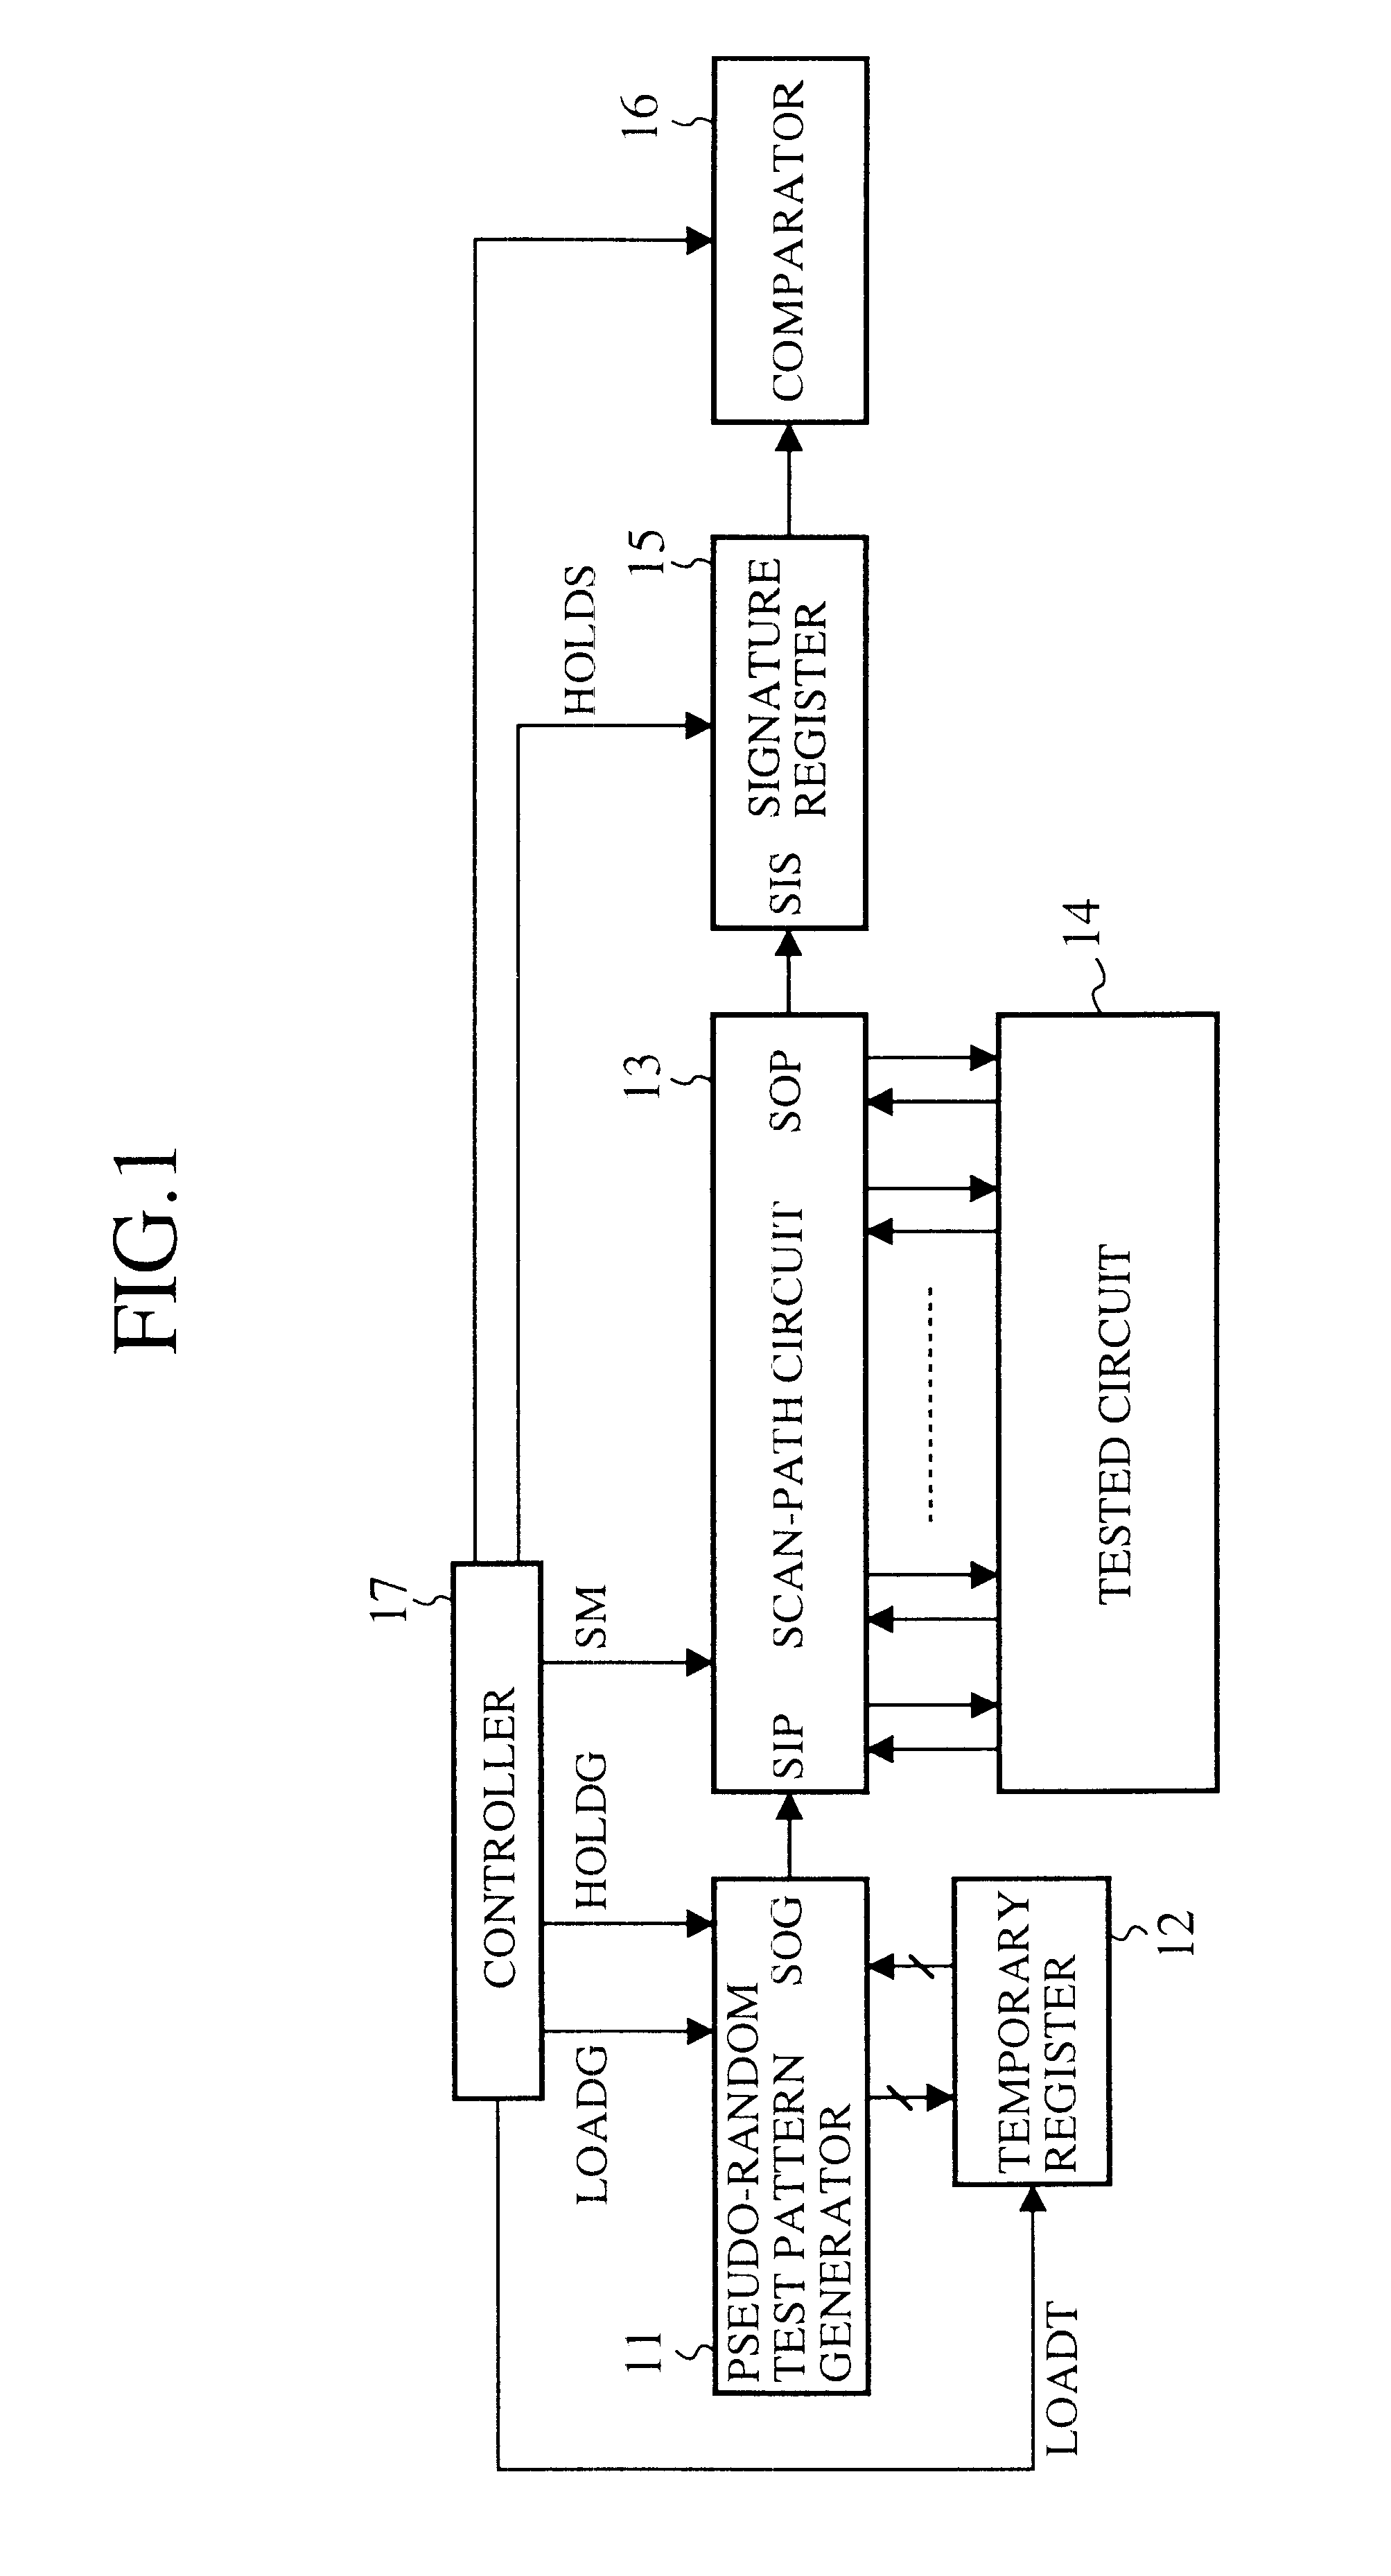 Electronic system with self-test function and simulation circuit for electronic system